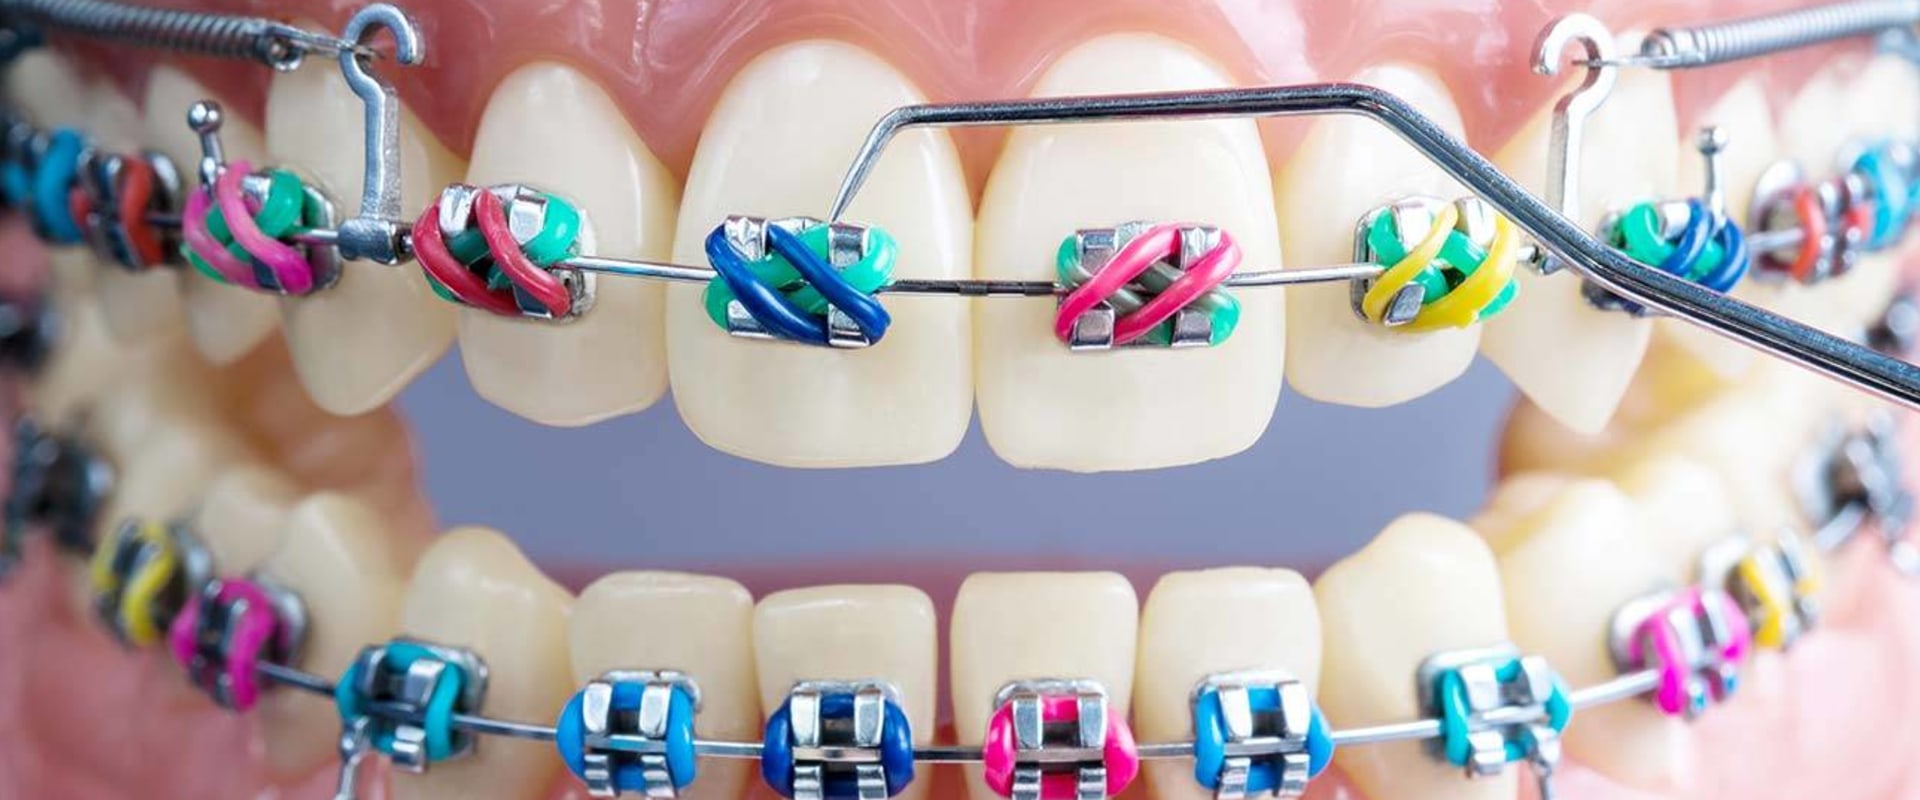 What Treatments Do Orthodontists Provide?